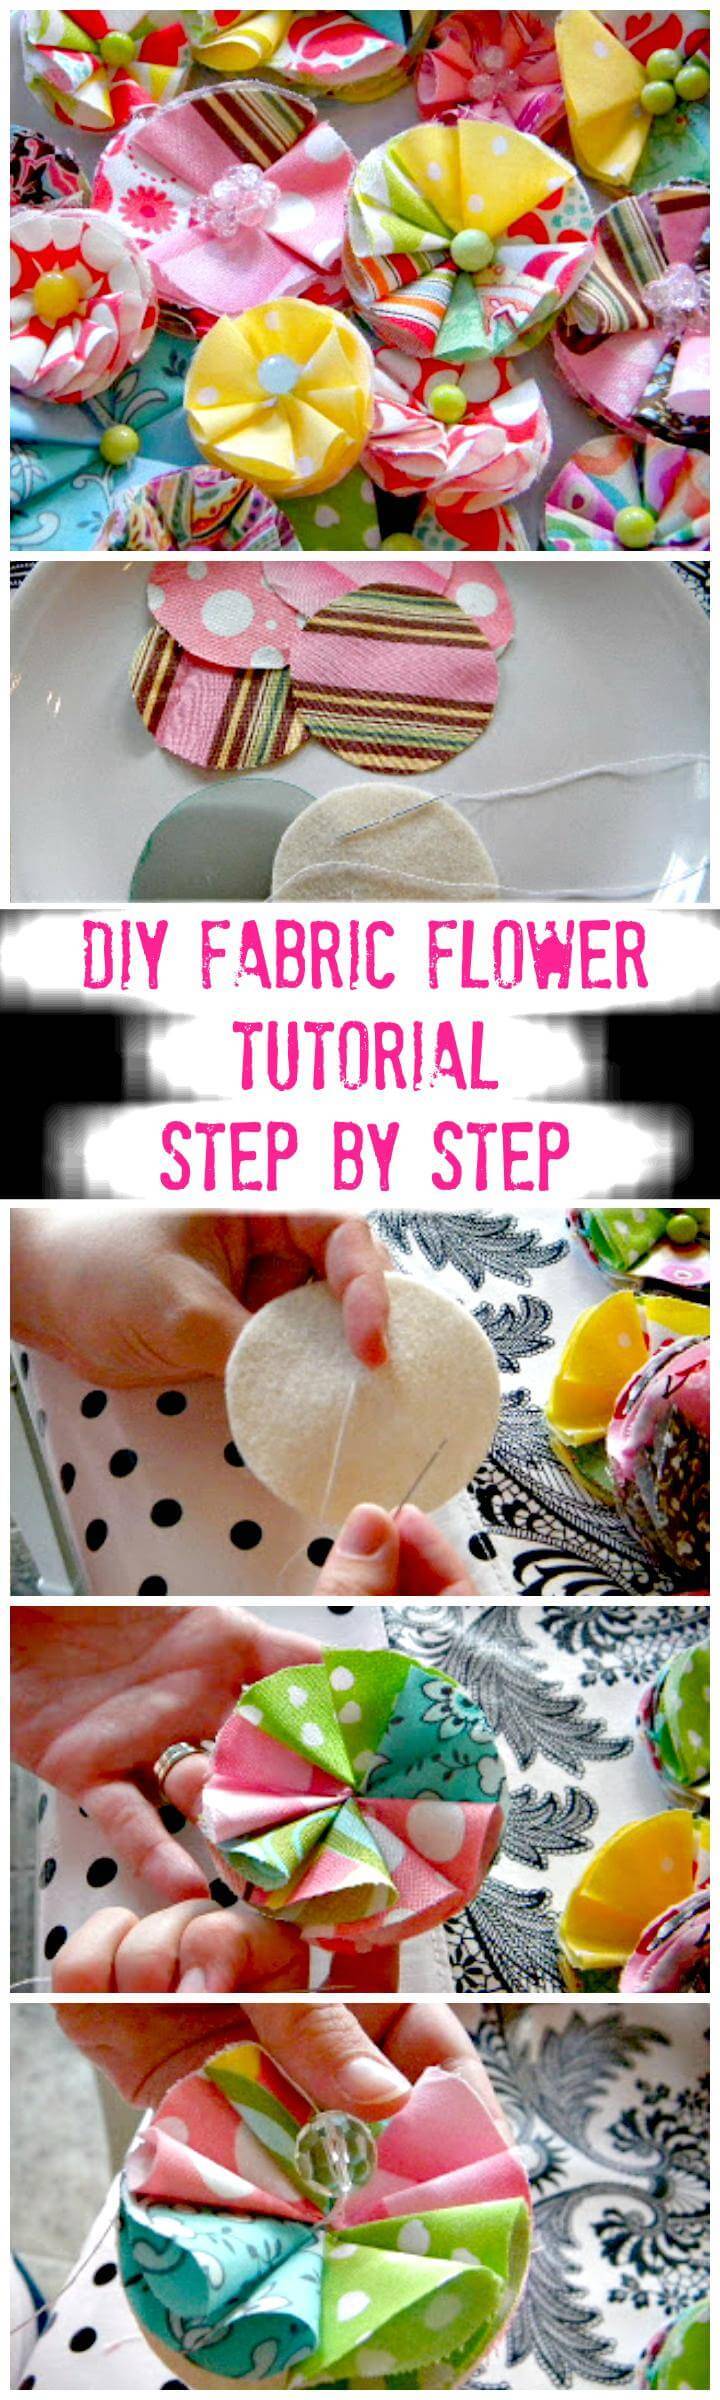 50 Easy Fabric Flowers Tutorial Make Your Own Fabric Flowers ⋆ Diy Crafts